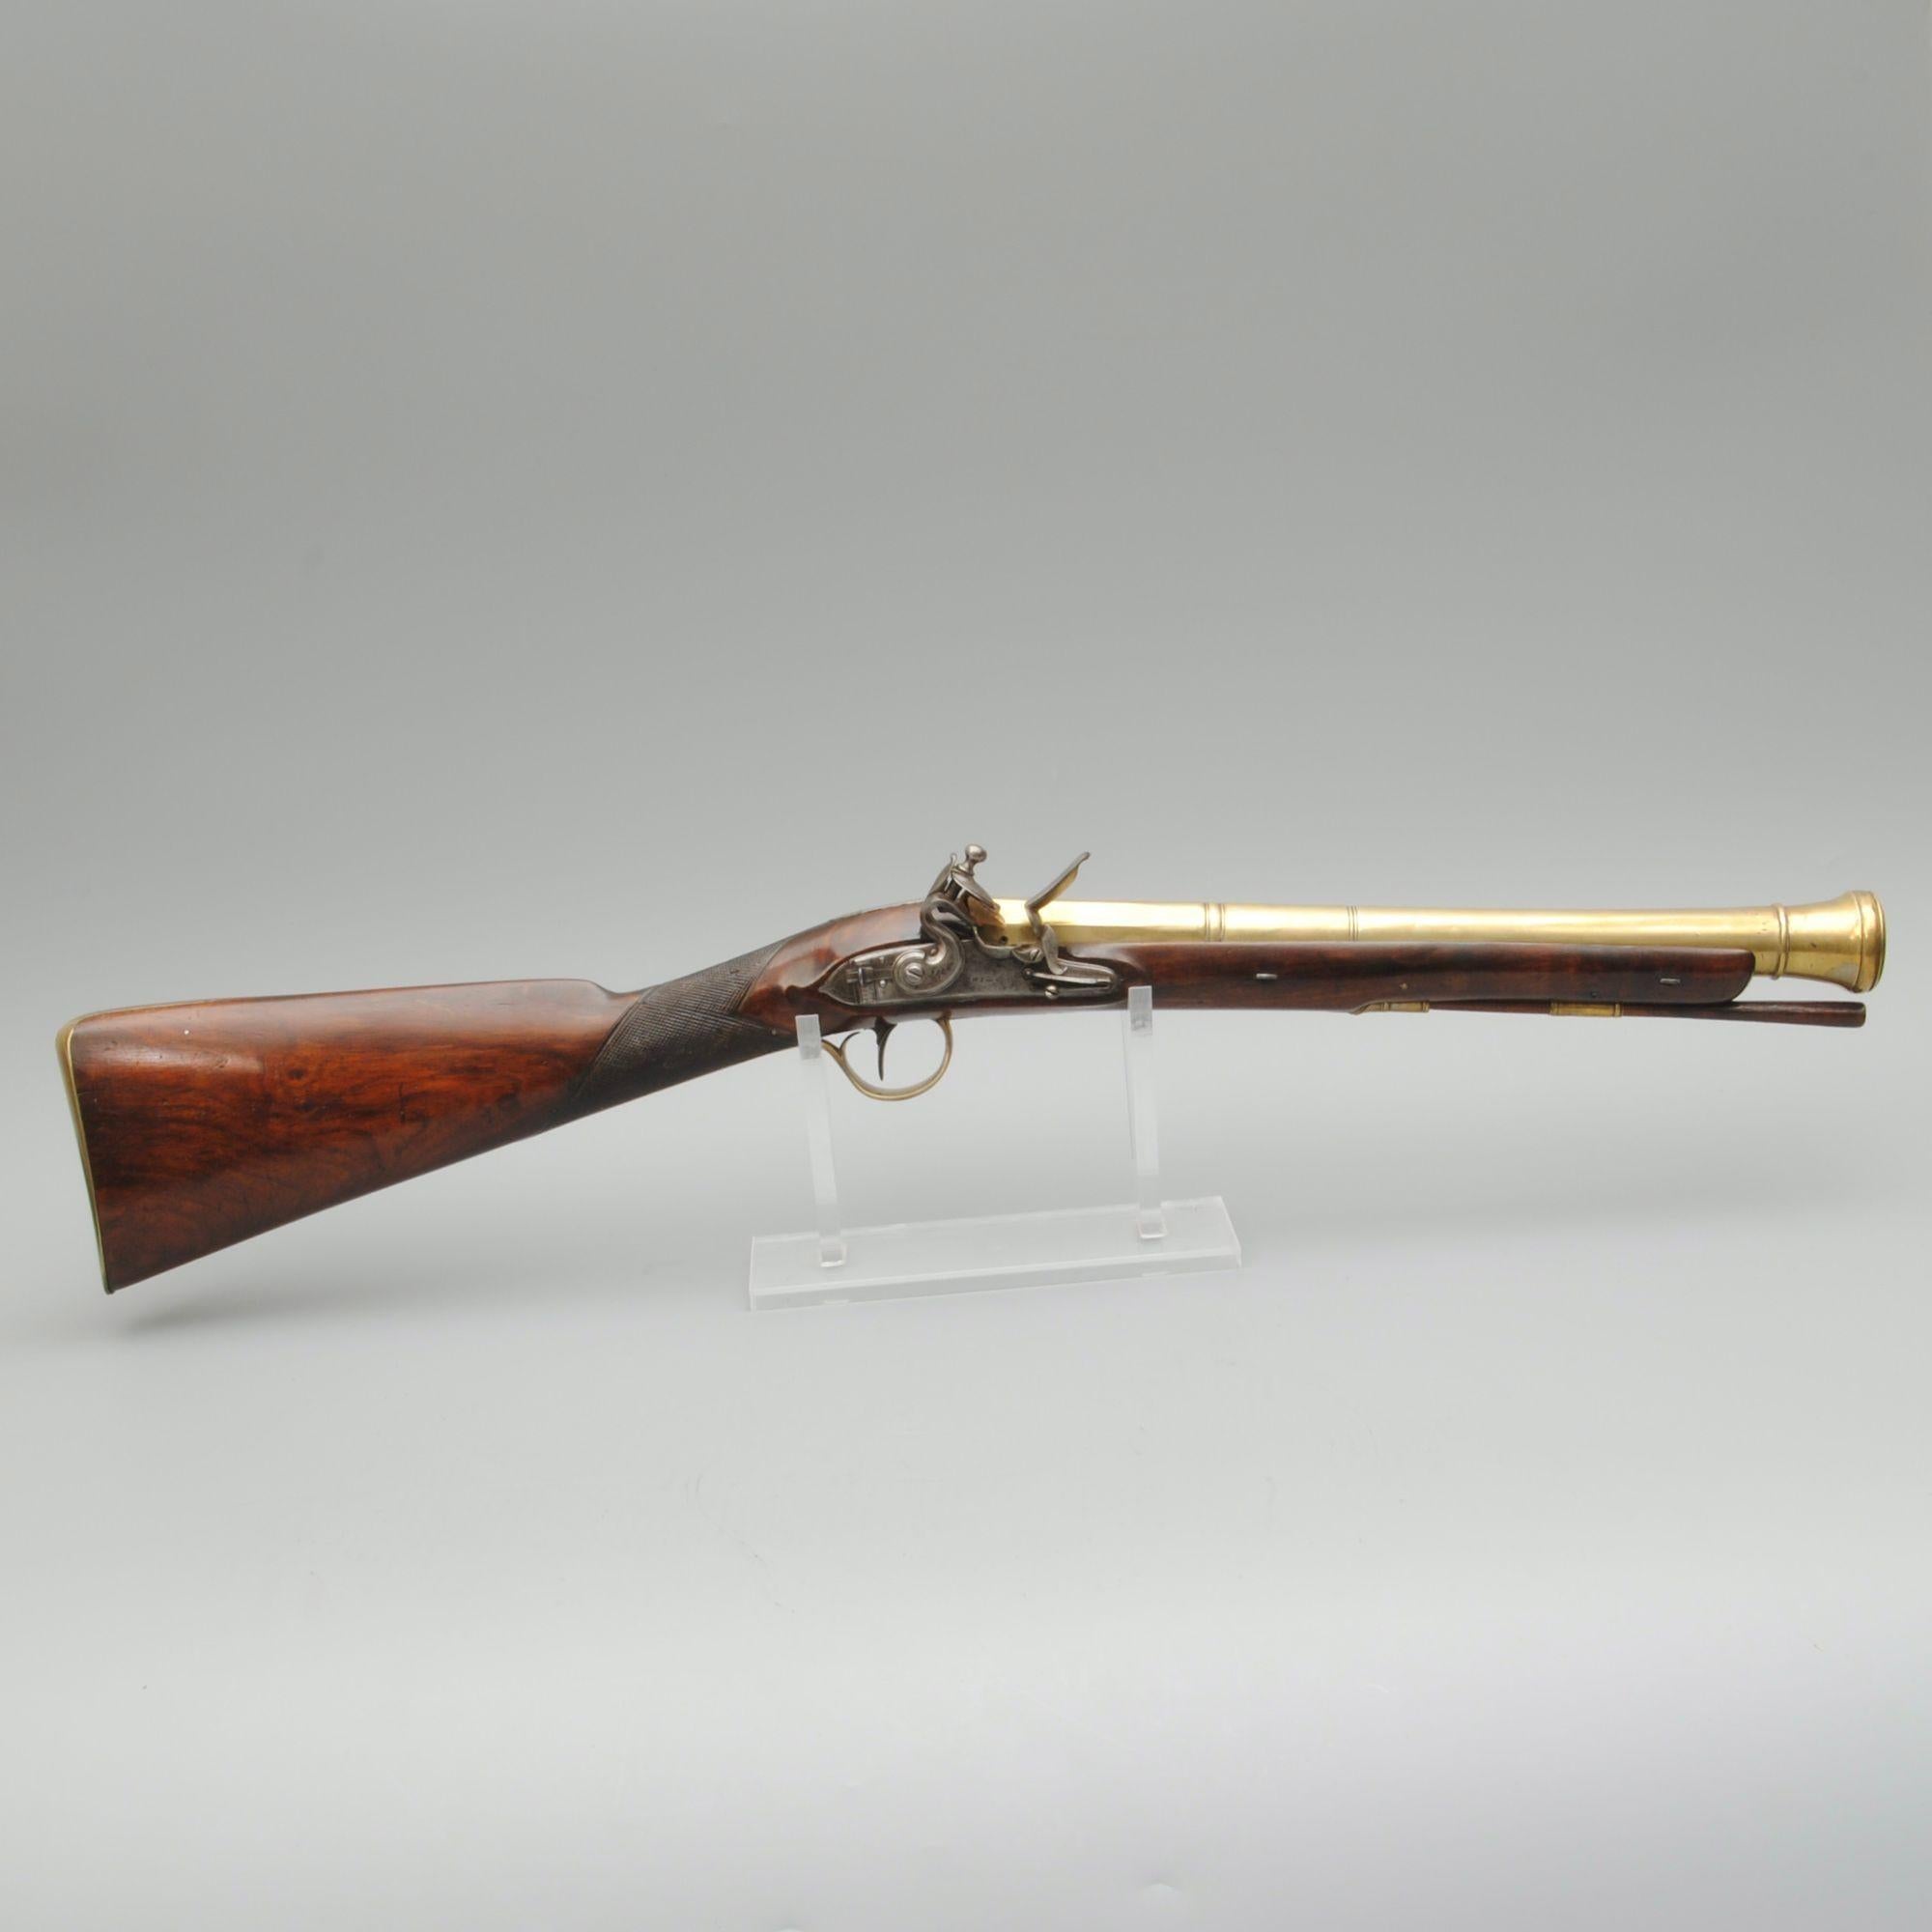 A fine example of a brass barrelled blunderbuss by the famous maker Twigg. The three staged barrel is signed London. Good colour to the walnut stock which is fully brass mounted with engraved details. The lock signed Twigg.
Circa 1795
Barrel